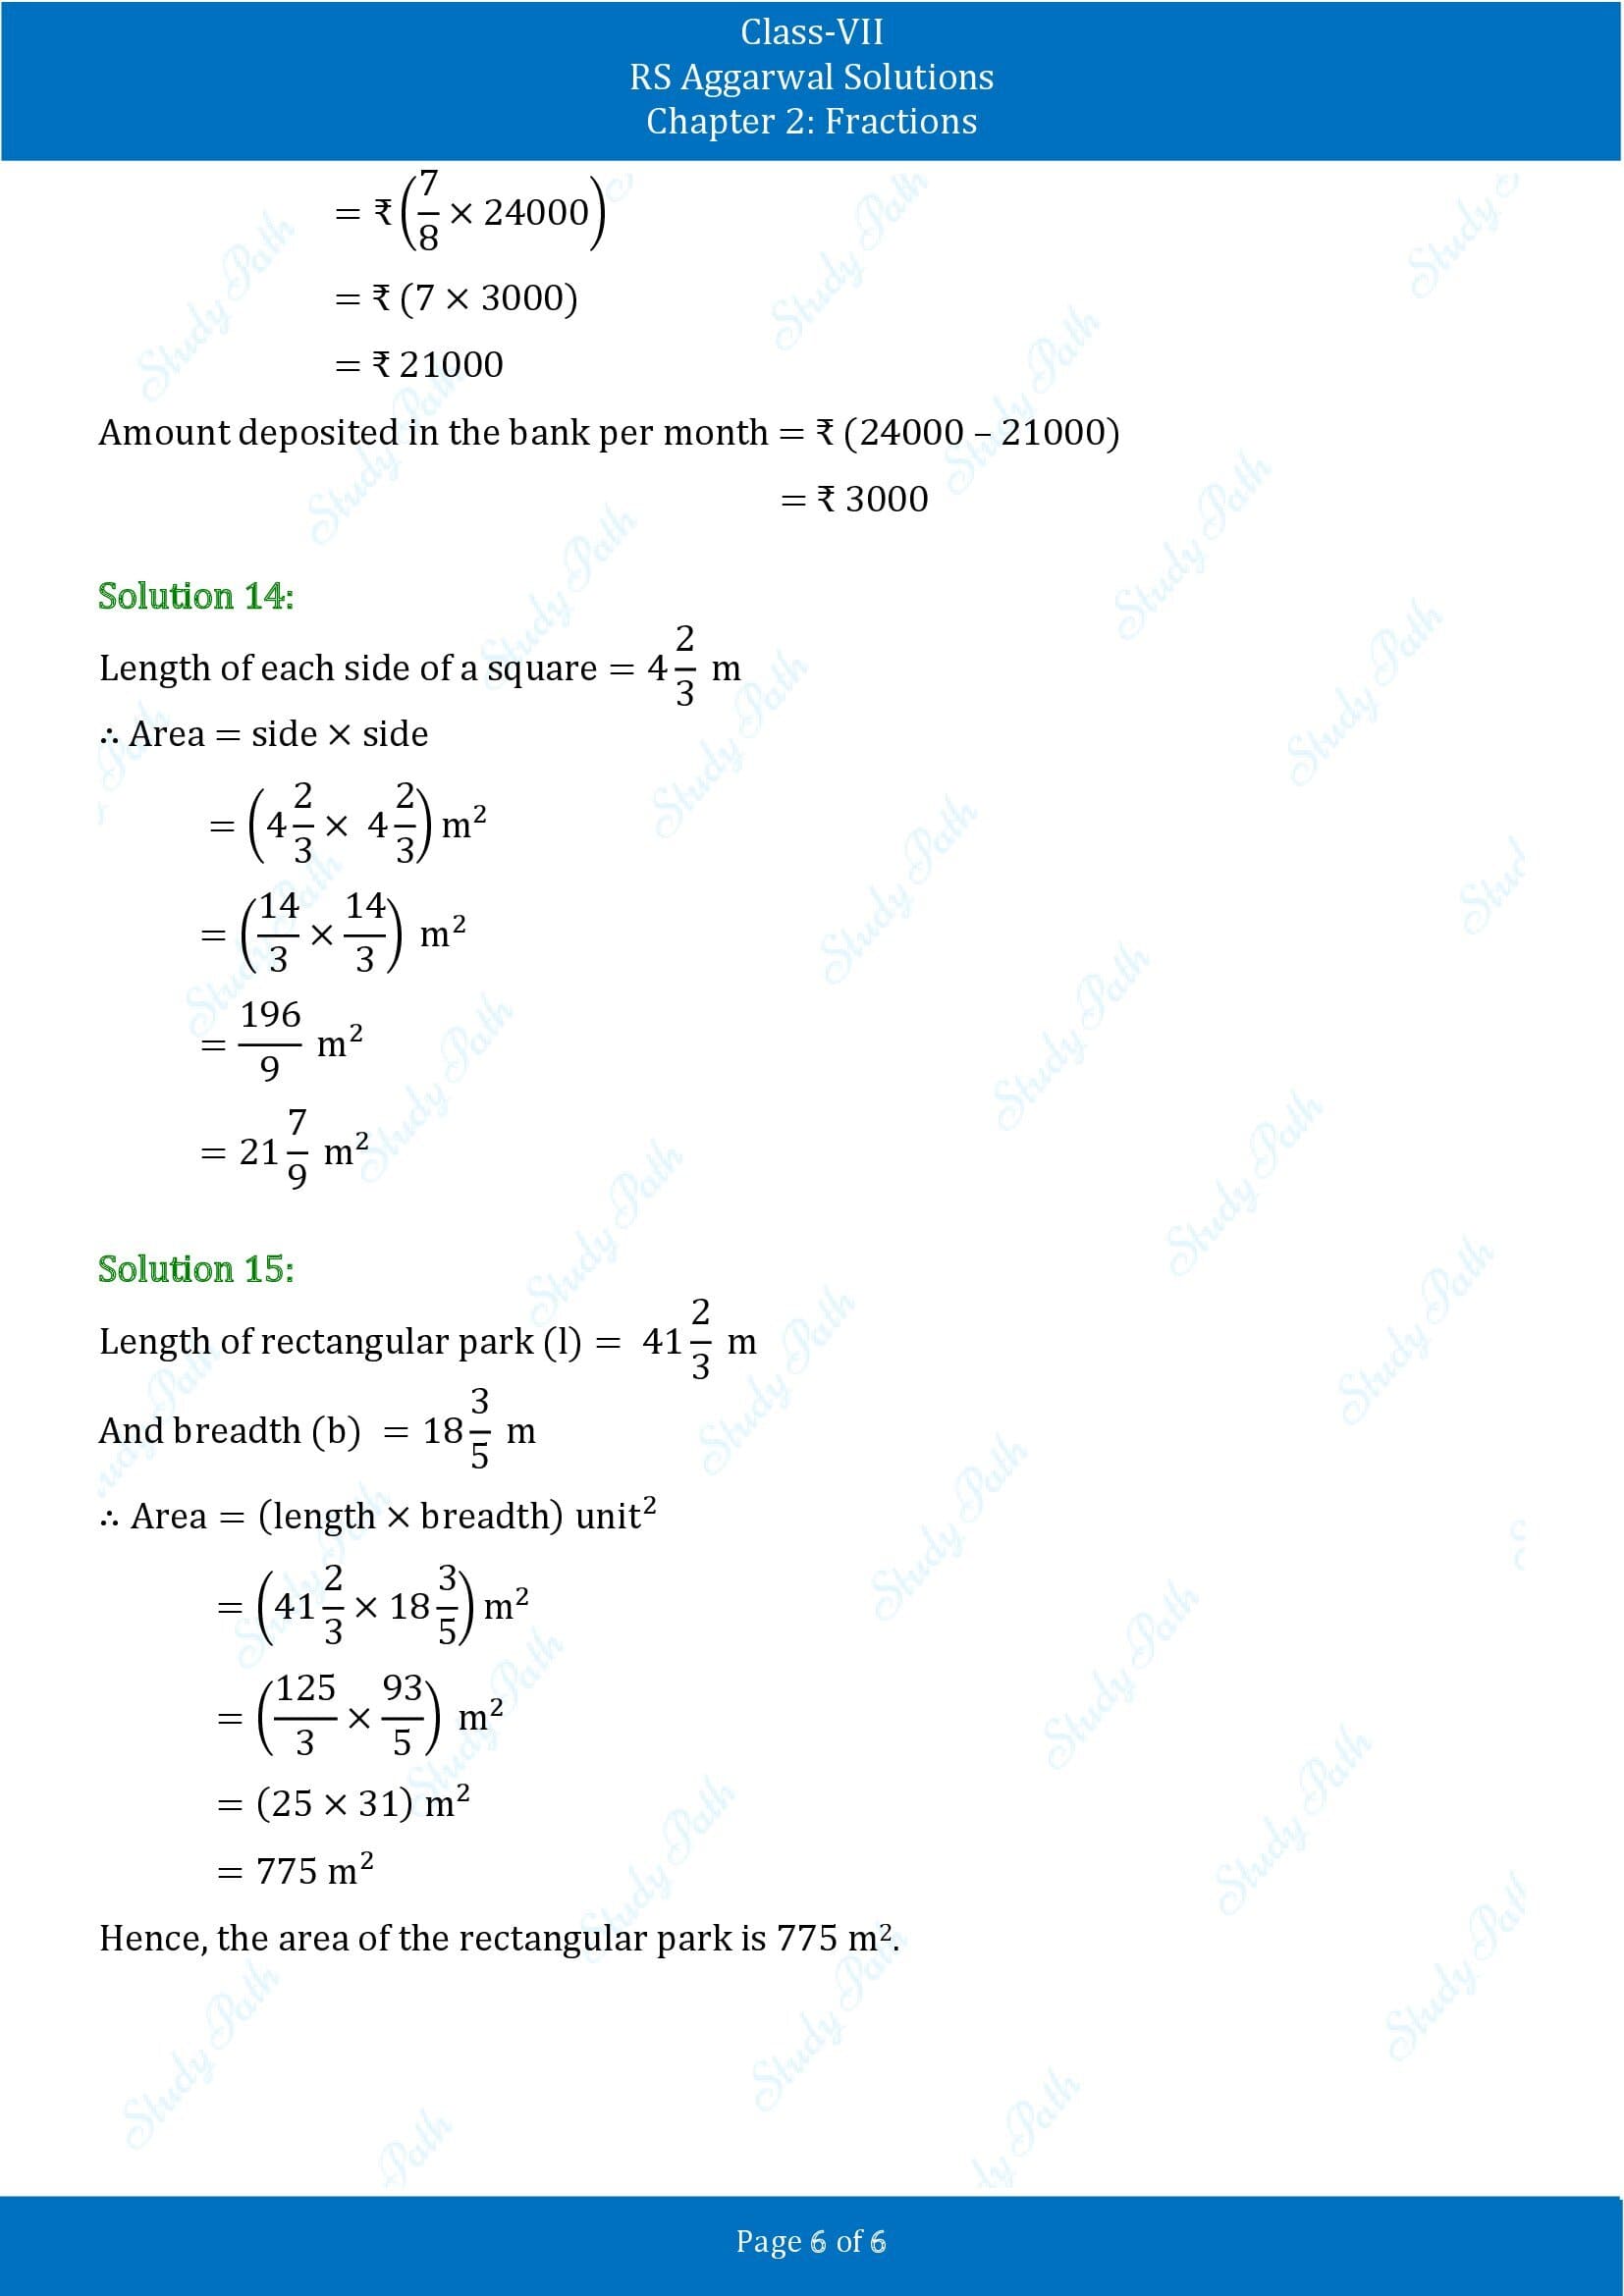 RS Aggarwal Solutions Class 7 Chapter 2 Fractions Exercise 2B 00006